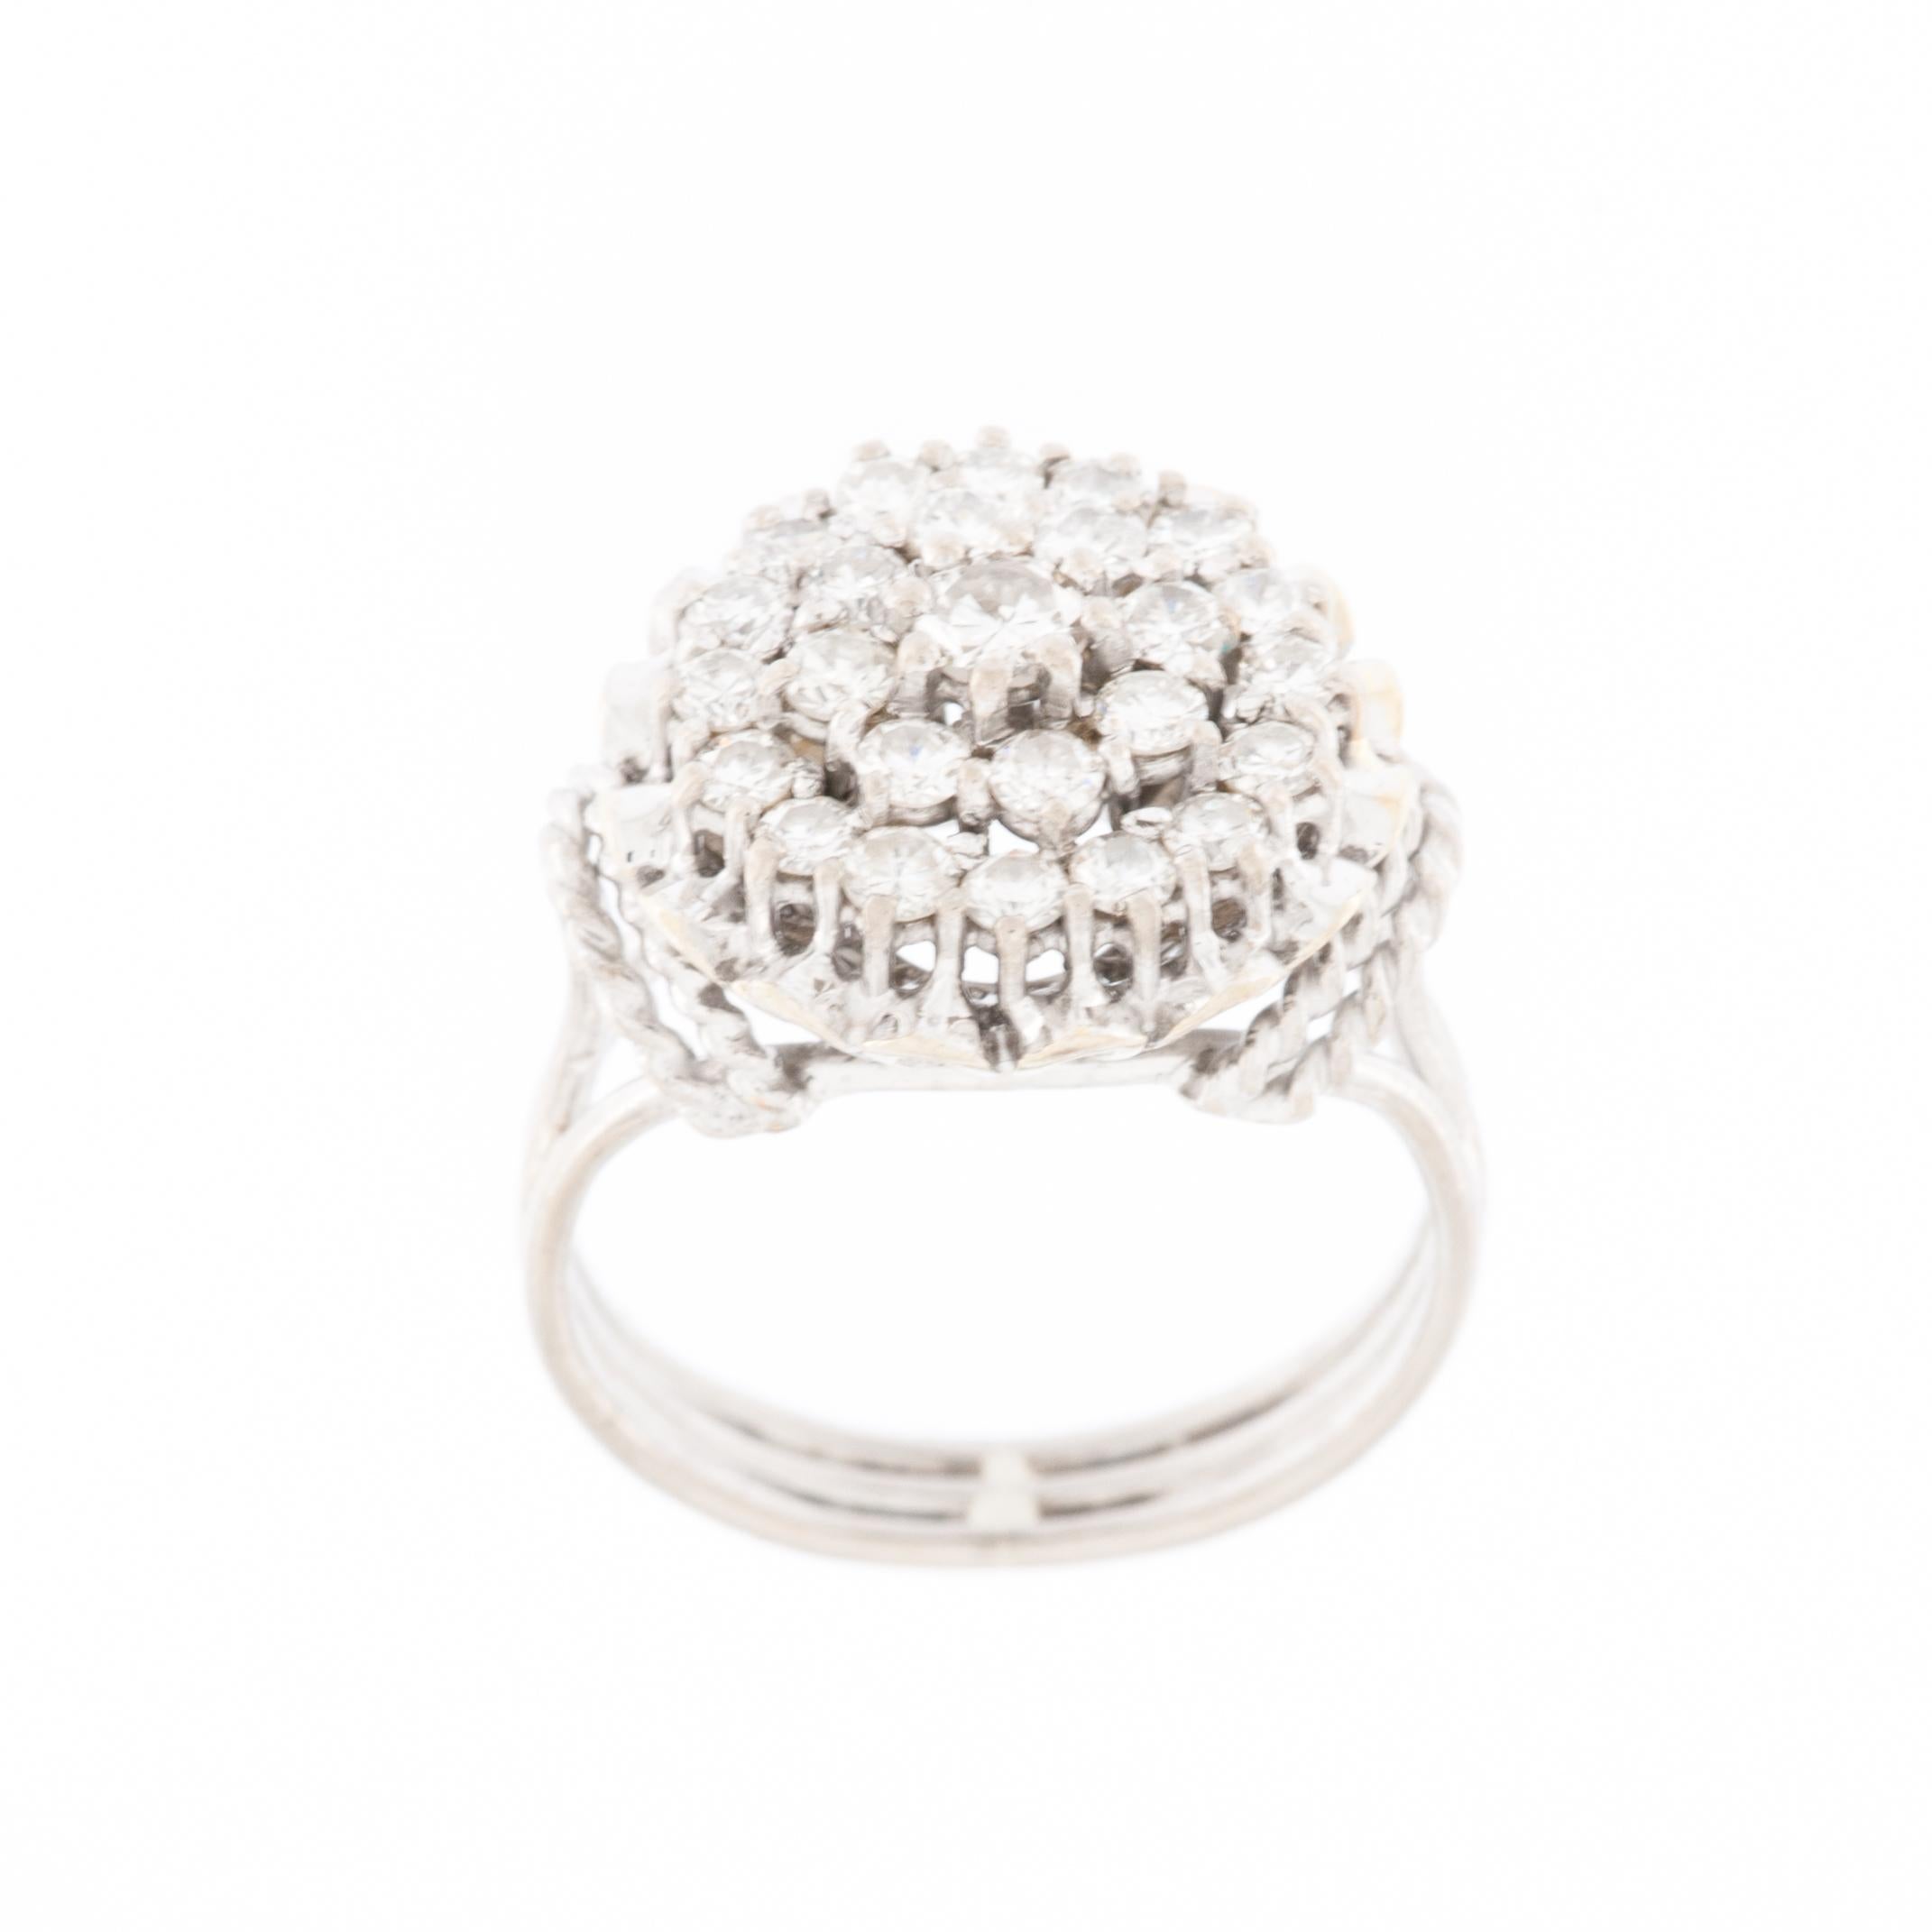 Gorgeous italian Cocktail Ring in 18kt White Gold set with brilliant-cut white Diamonds. The ring is undoubtedly the woman's most personal jewel and brings a touch of elegance to every movement of the hand. 
This marvelous ring has an 